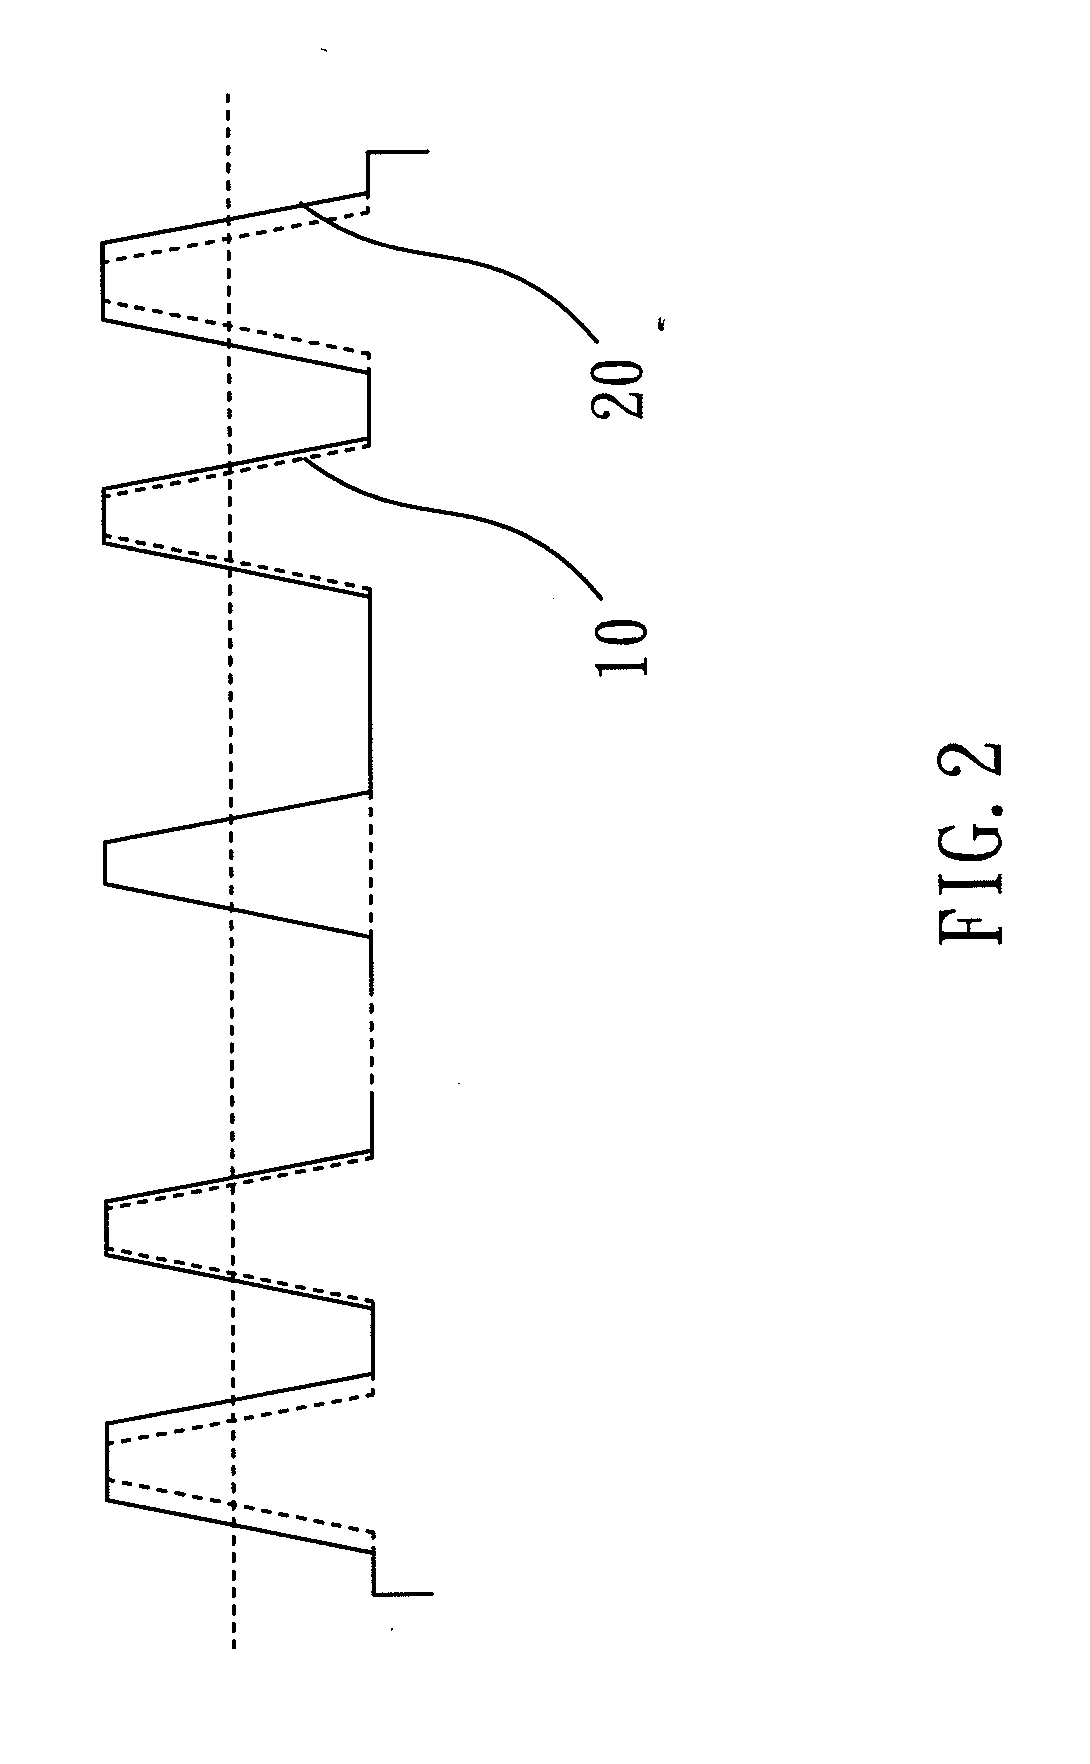 Variable-Tooth-Thickness Worm-Type Tool and Method For Using The Same To Fabricate Gears